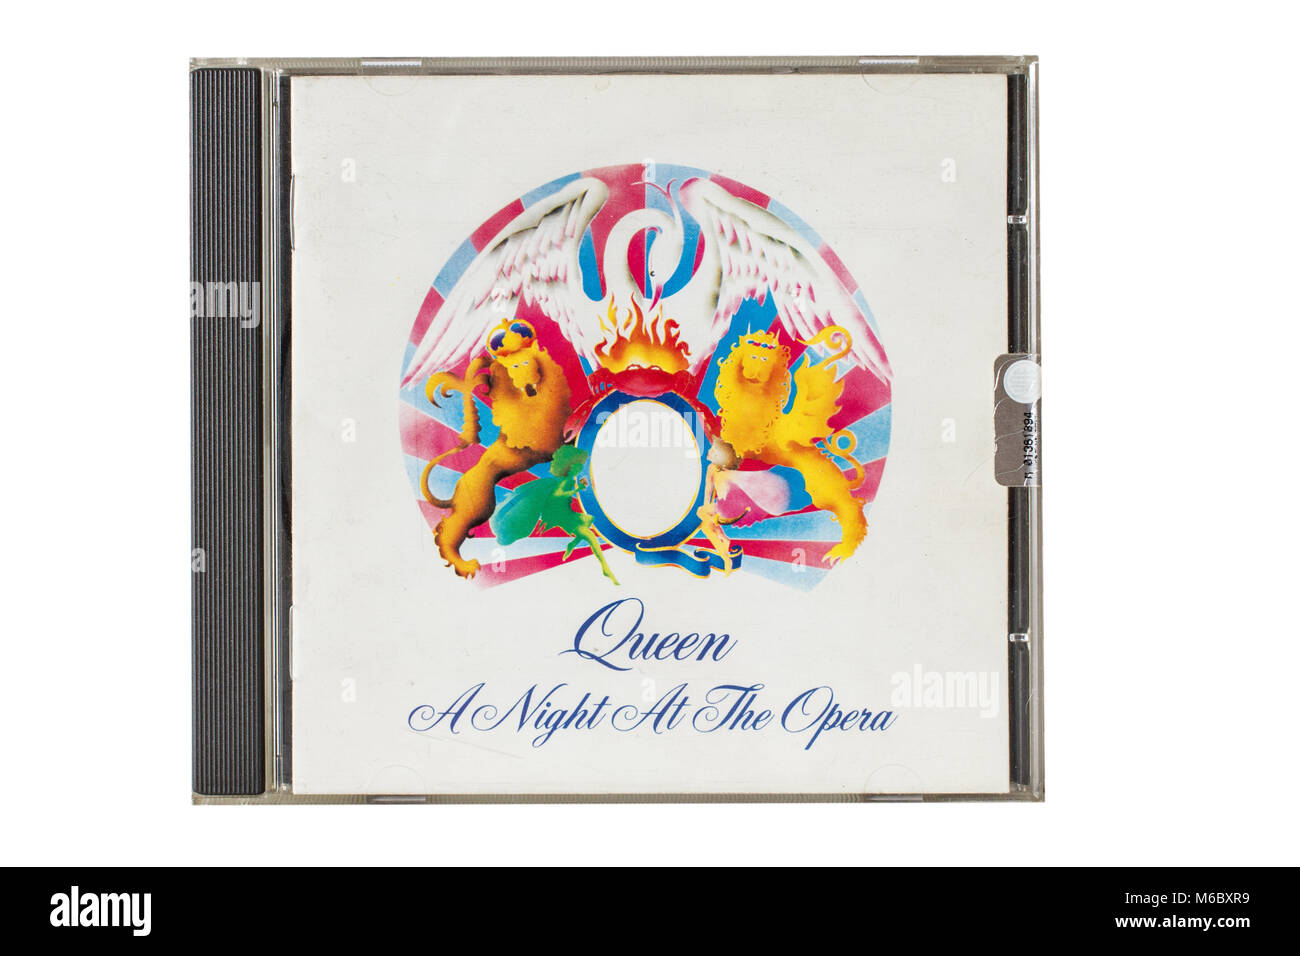 A night at the opera CD album by Queen Stock Photo